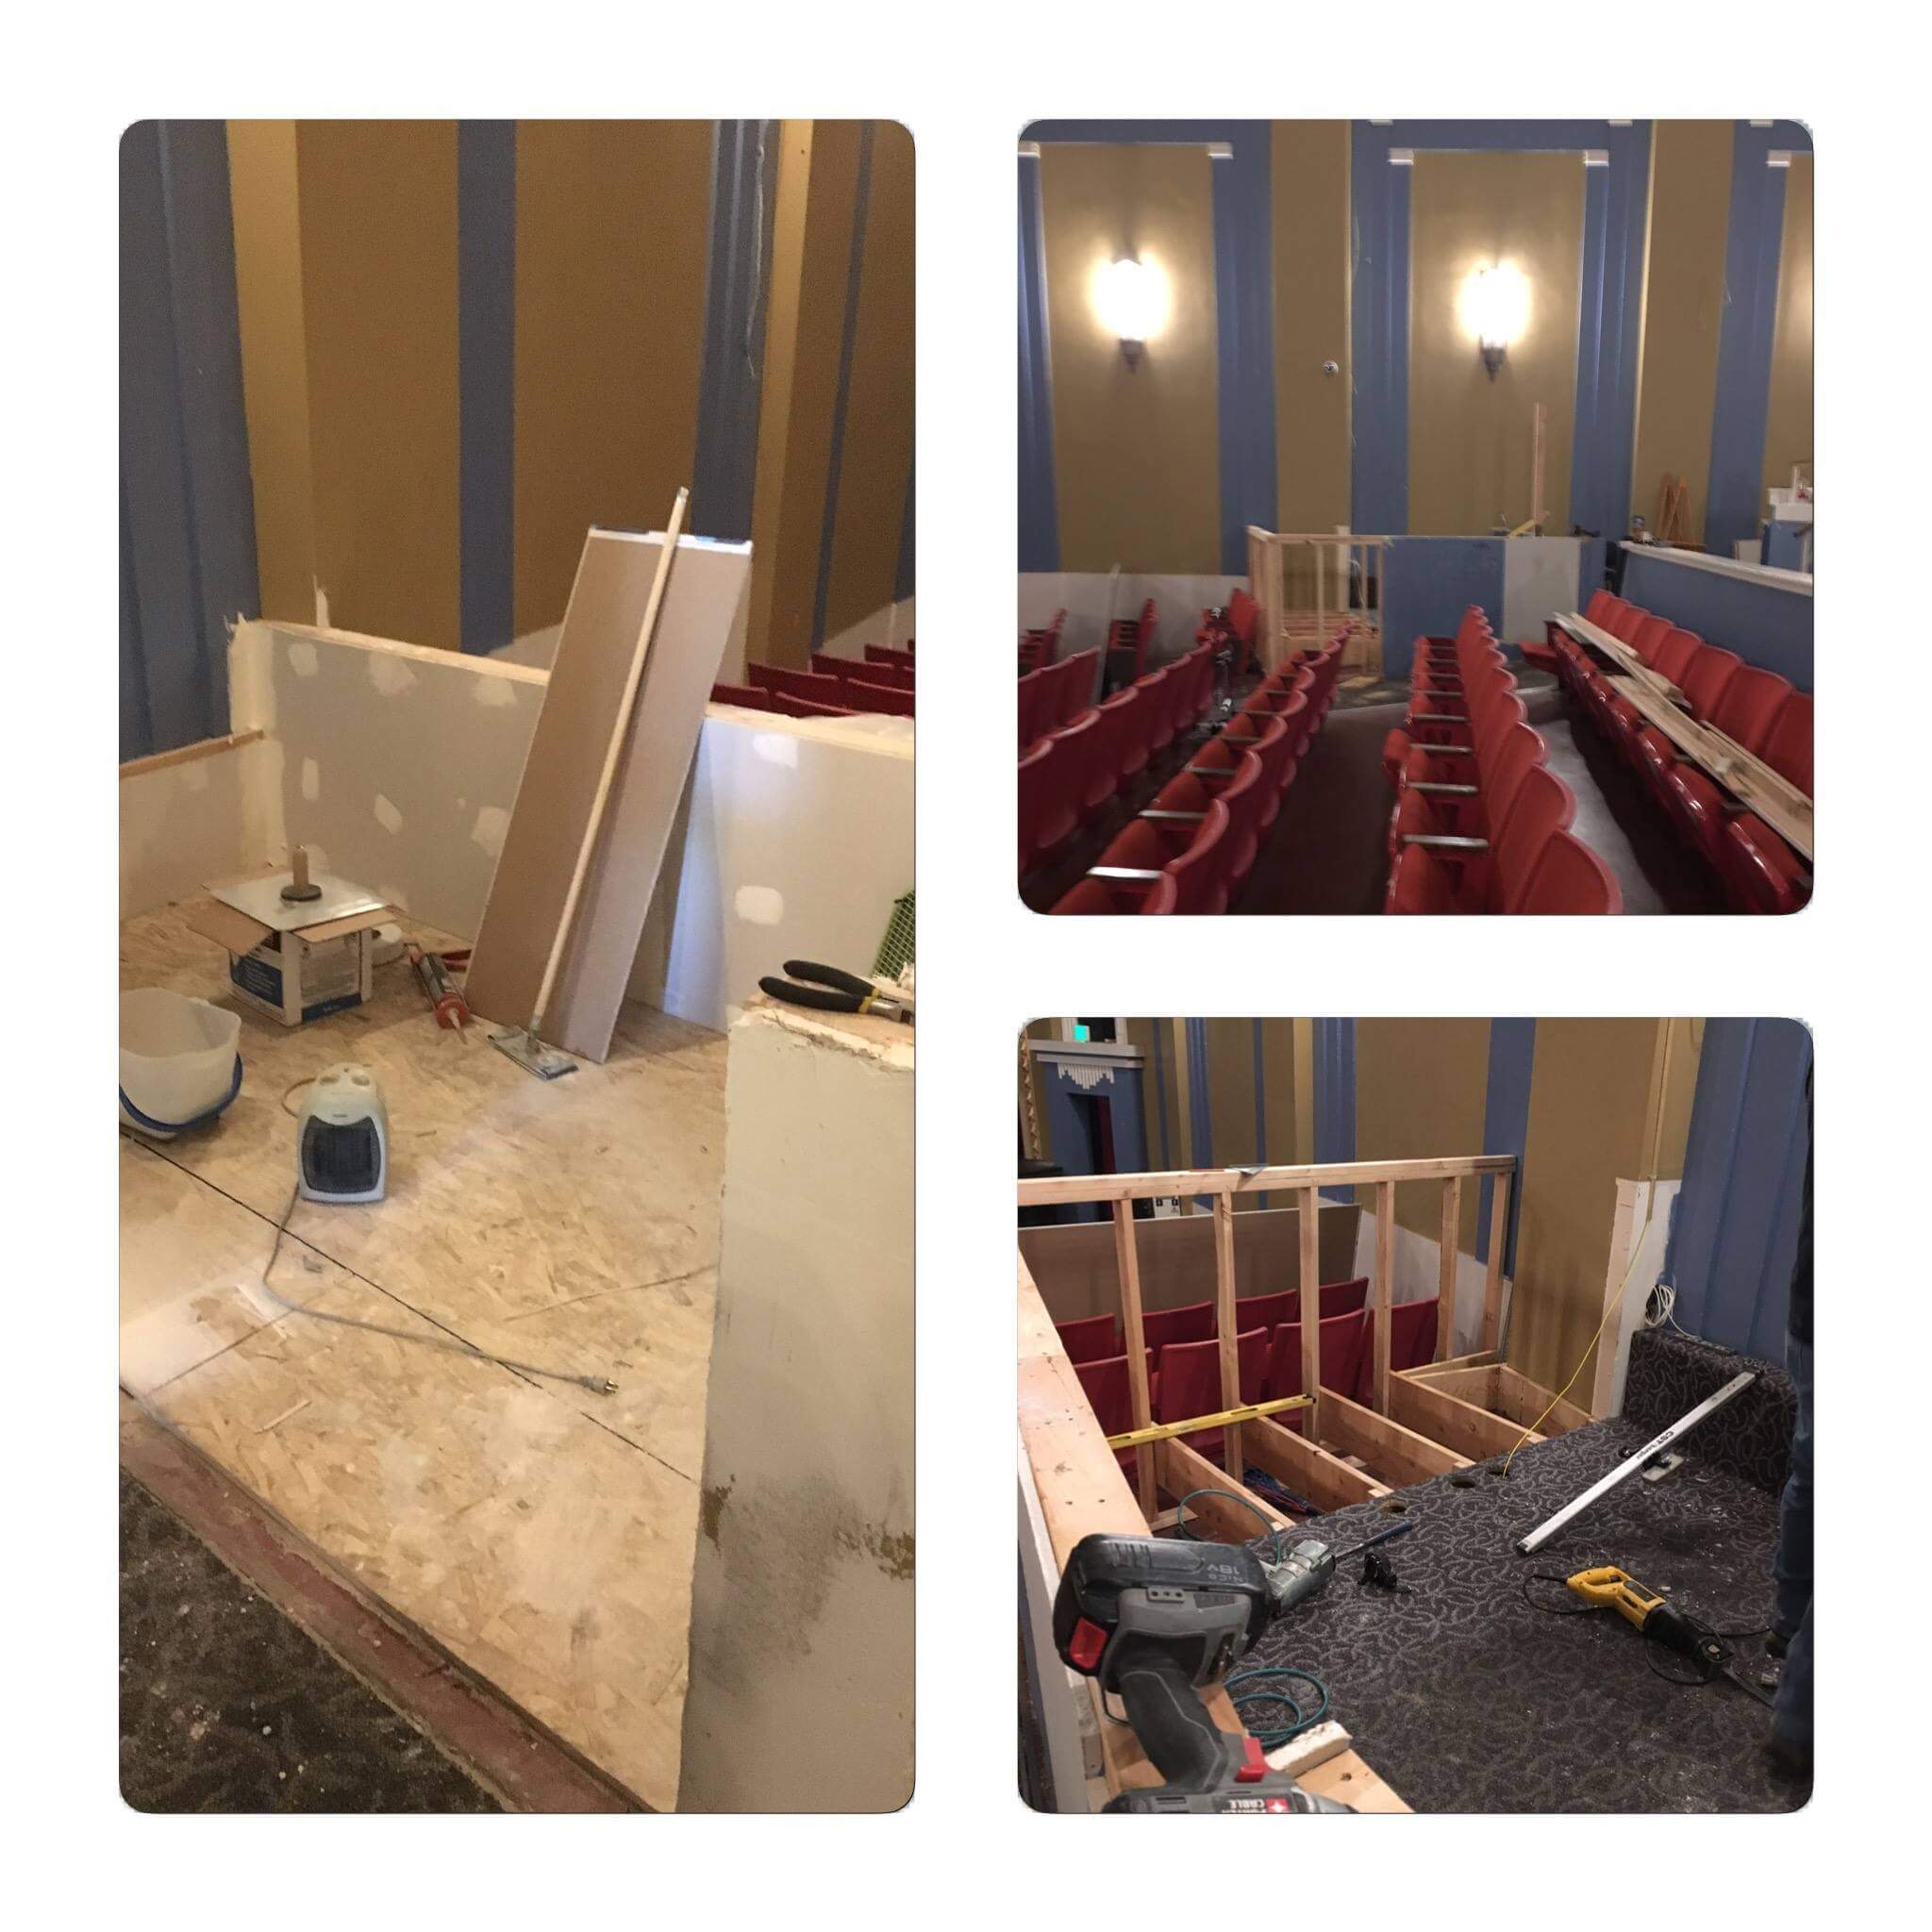 The Romance Theater is undergoing renovations.